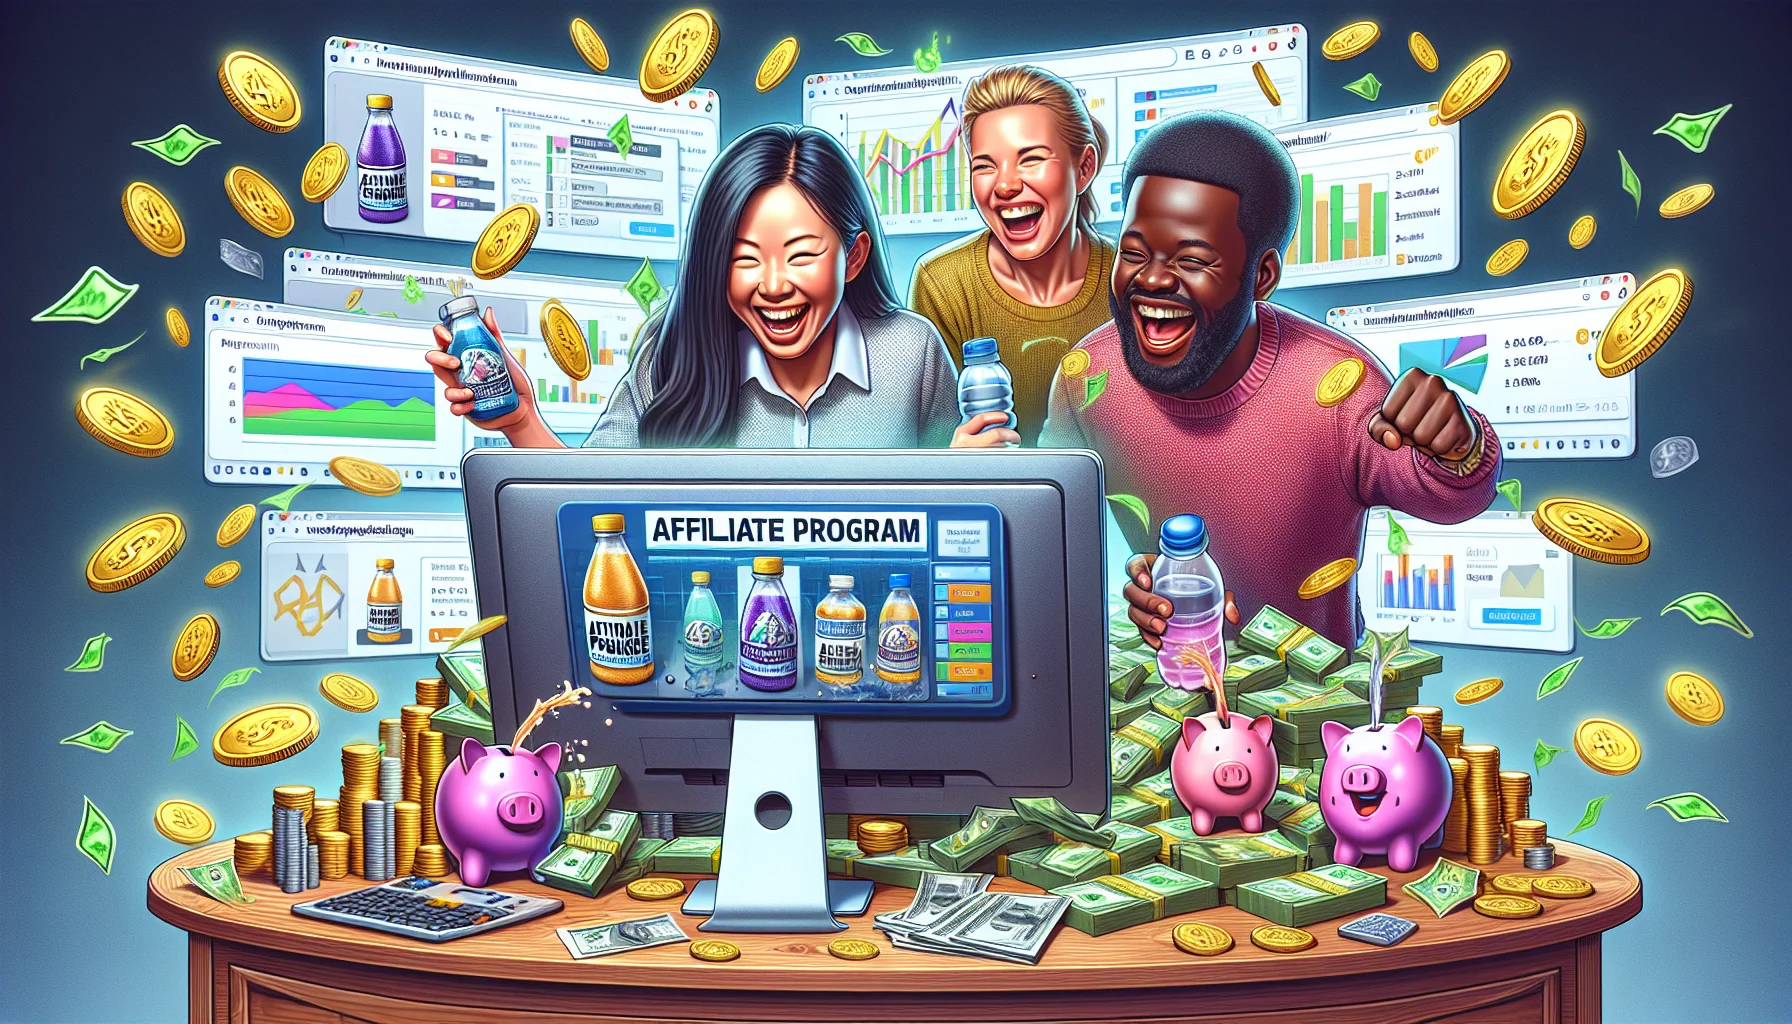 Generate a comical, true-to-life scene illustrating the concept of an affiliate program for a hydrating drink product, intertwined with the theme of online monetary benefits. Picture a diverse blend of people, an Asian female and a Black male, zealously operating a sophisticated computer system laden with numerous browser tabs displaying charts, figures, and statistics. The screen clearly highlights the affiliate program logo, while the background is filled with elements symbolizing success and wealth, such as cash, gold coins, and piggy banks. The environment exudes a cheerful, energetic vibe and the characters are laughing, hinting at the fun and potential financial rewards in the program.